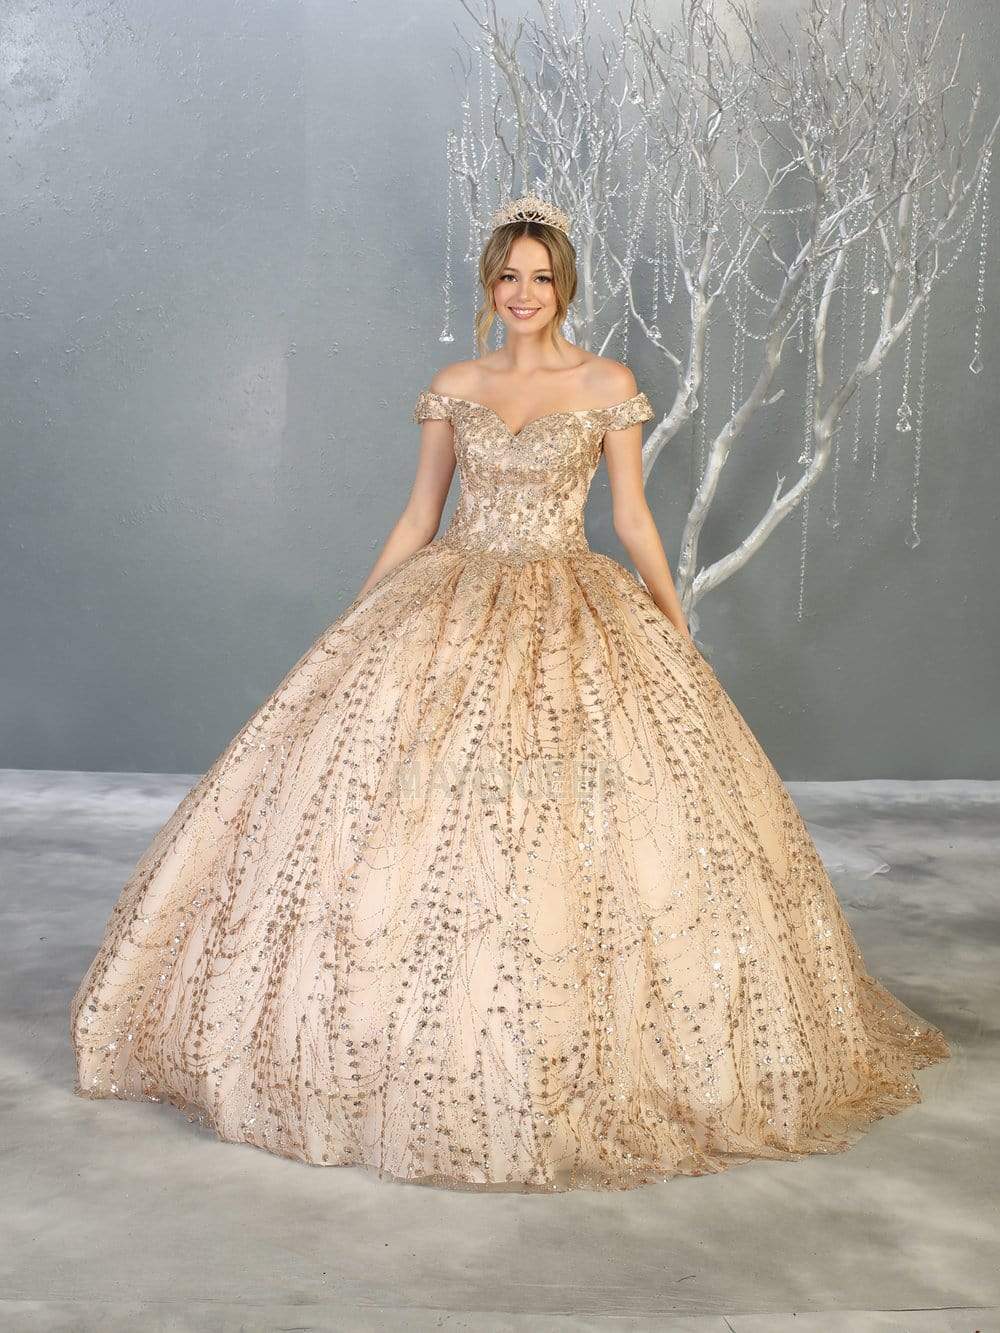 May Queen - LK153 Beaded Appliqued Off Shoulder Ballgown Quinceanera Dresses 4 / Champagne/Gold